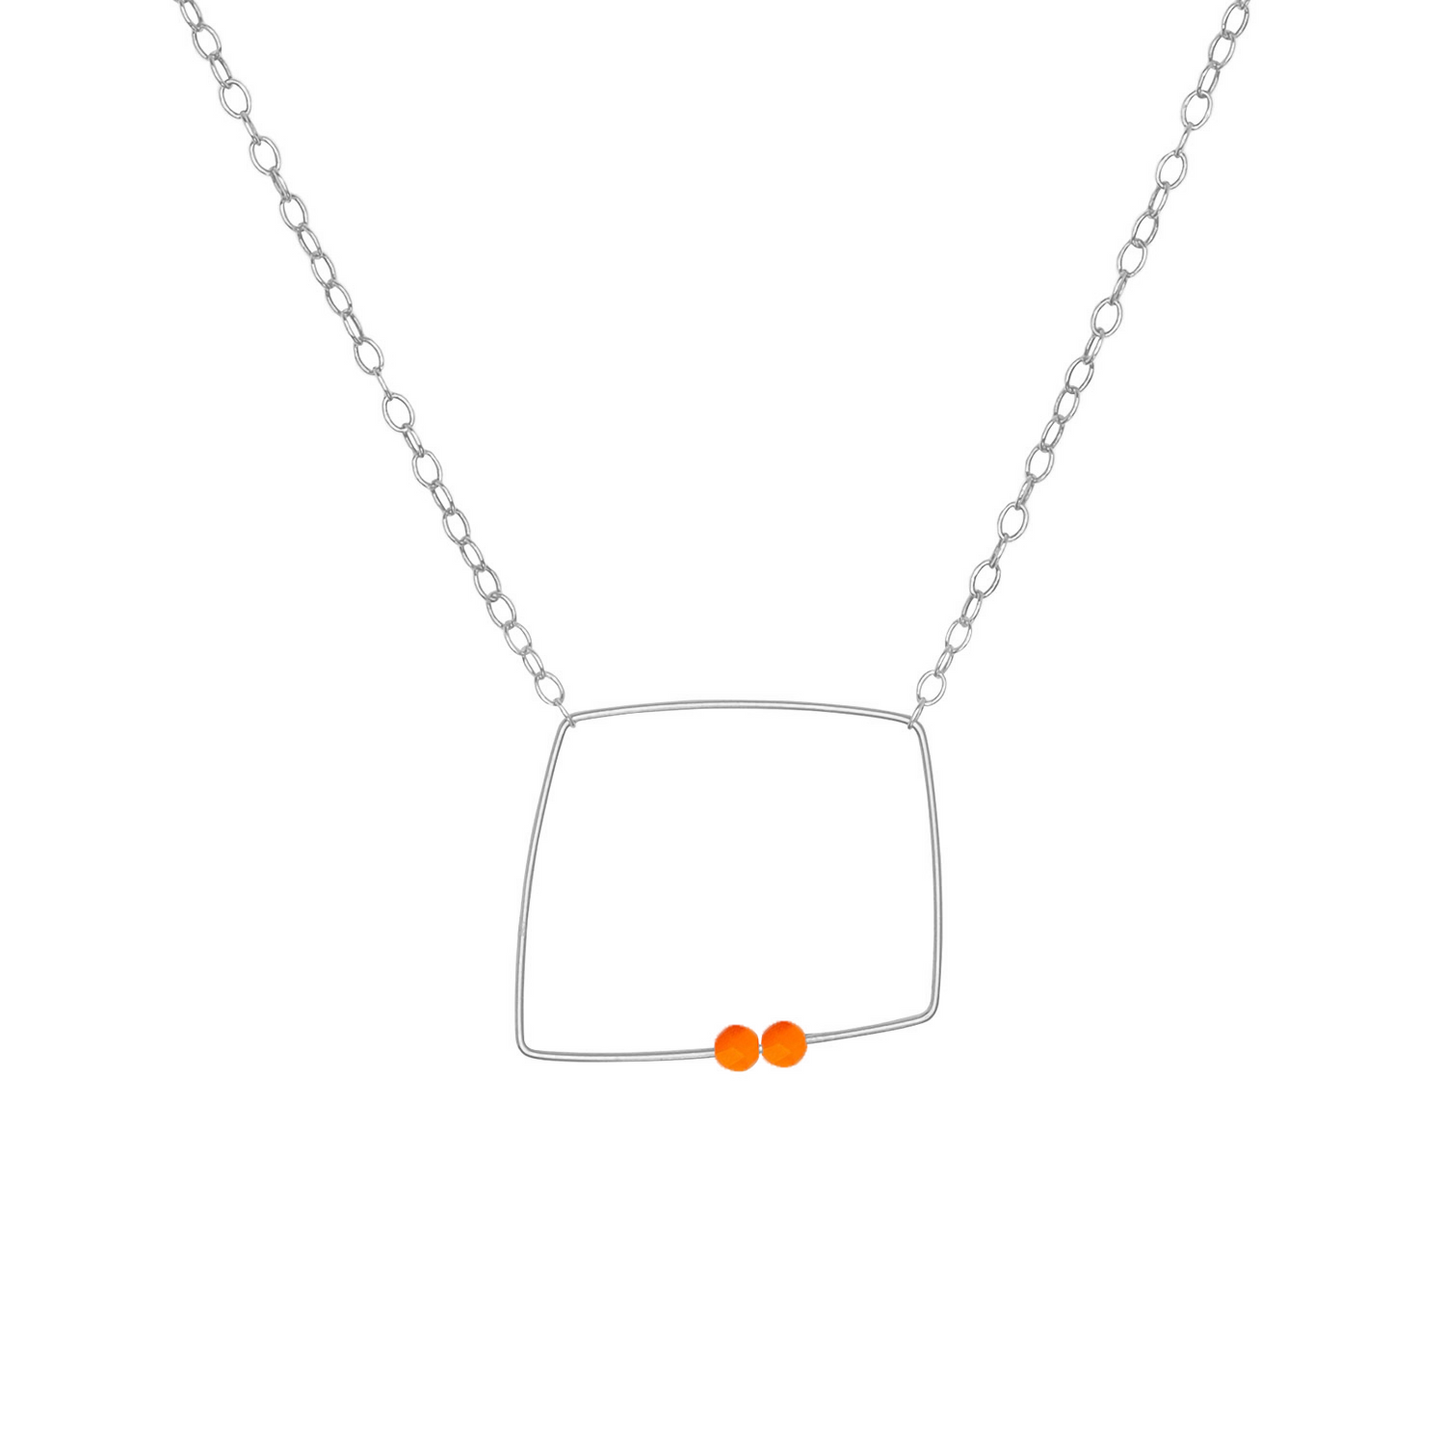 Small Square Pendant Necklace with choice of Round Gemstone Beads